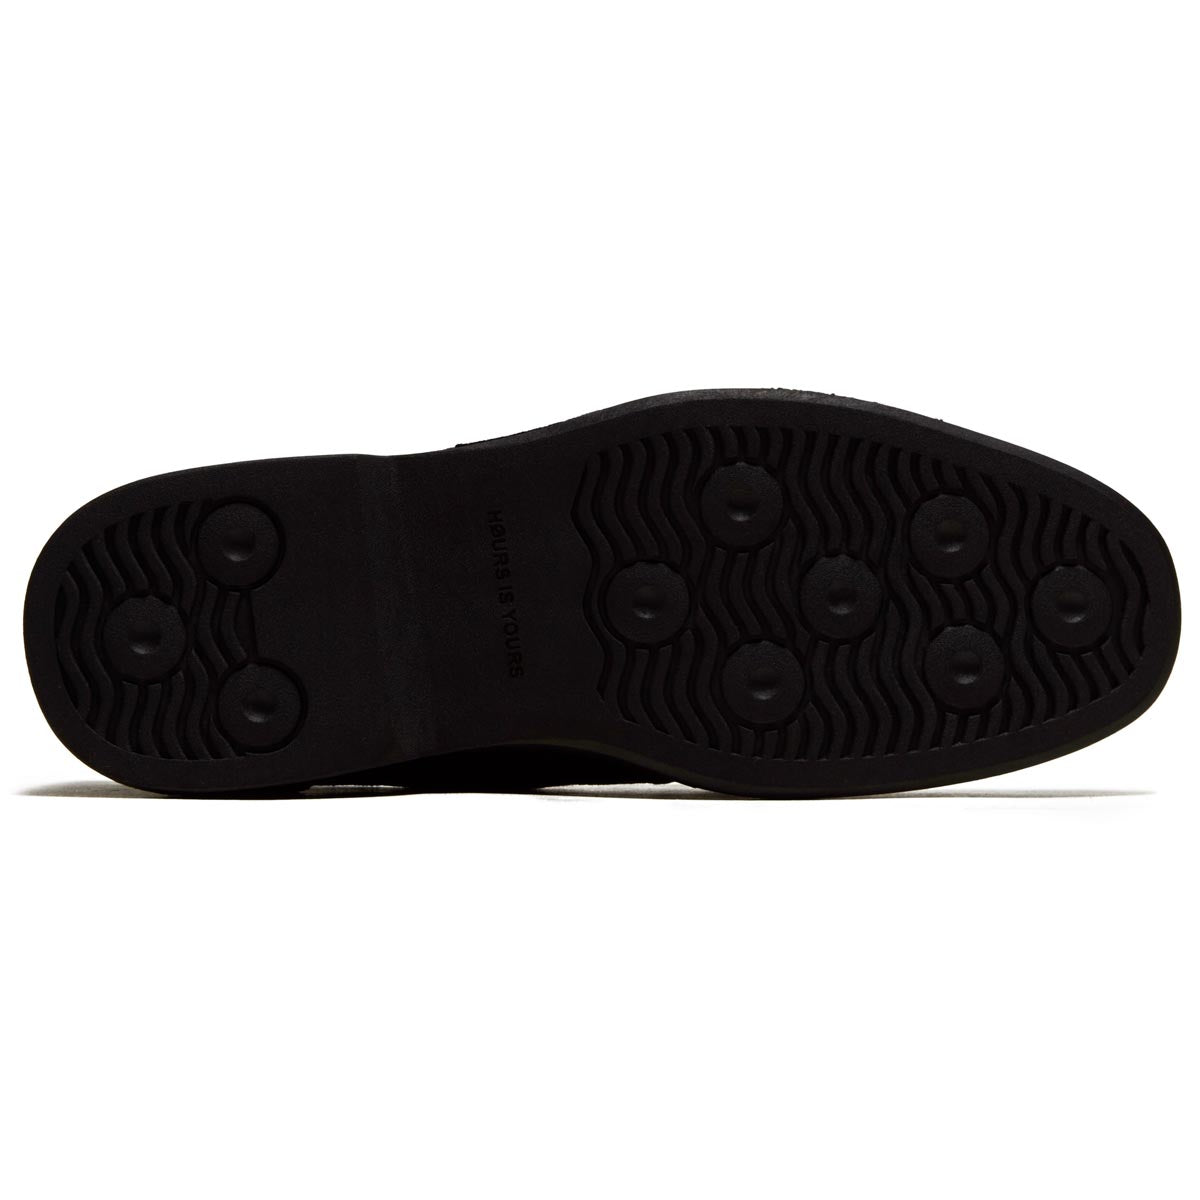 Hours Is Yours Cohiba Penny Loafer Shoes - Black Suede image 4